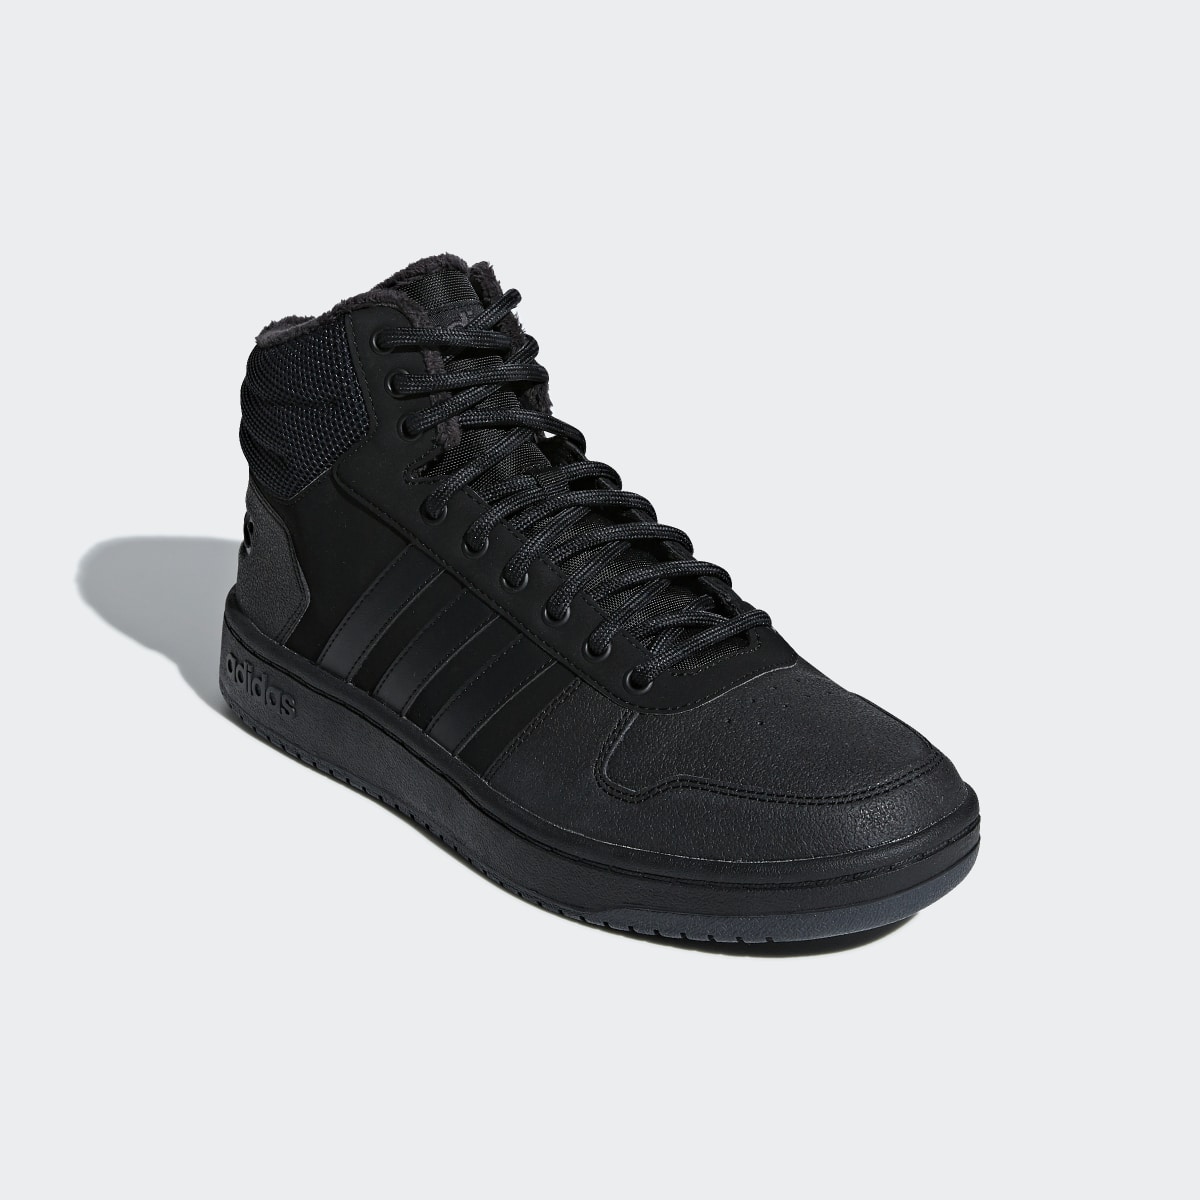 Adidas Hoops 2.0 Mid Shoes. 6